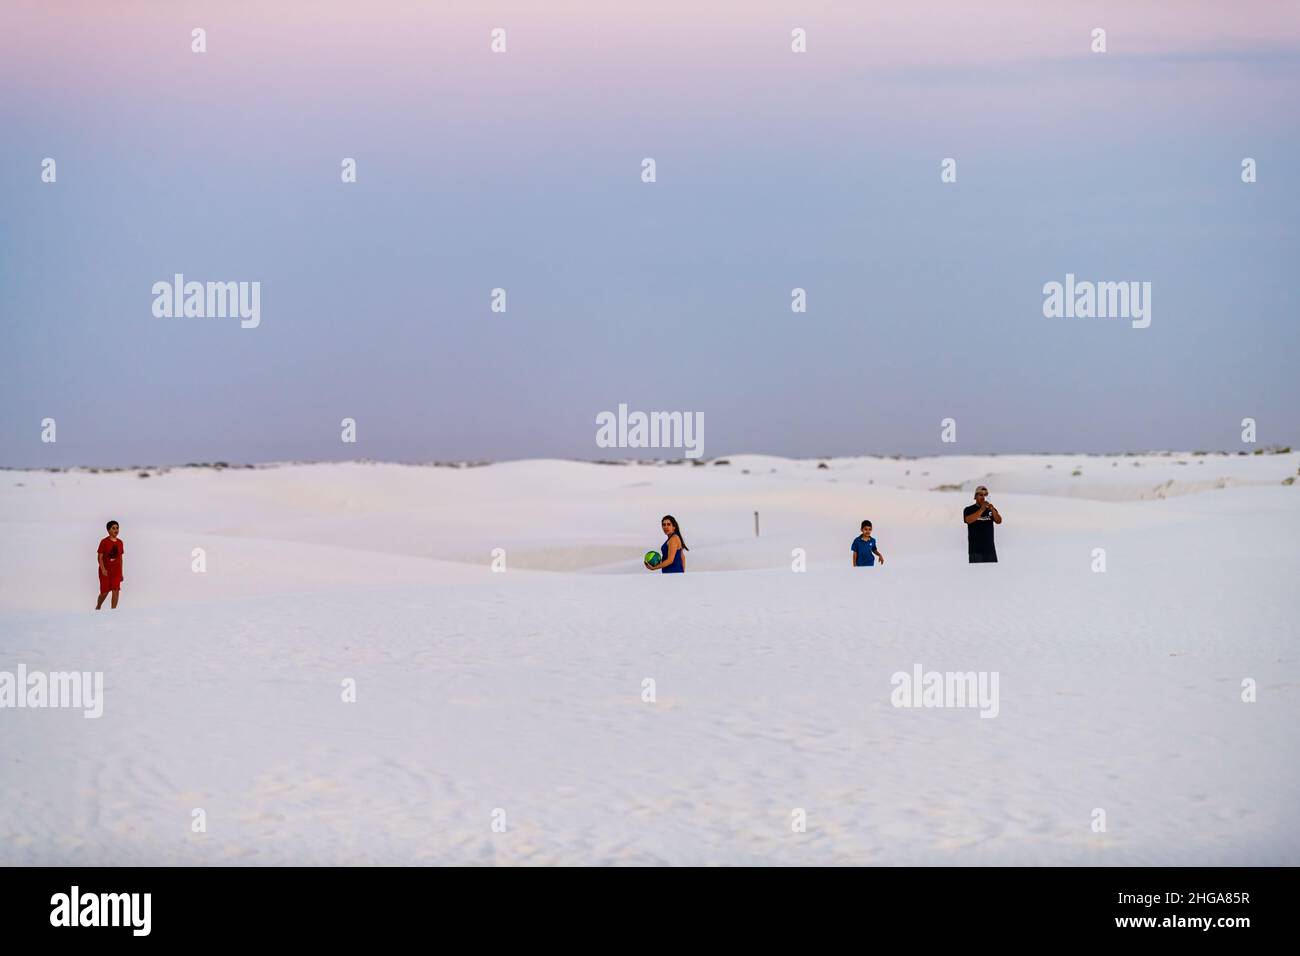 Alamogordo, USA - June 9, 2019: White sand dunes in New Mexico with group of people in background during pastel sunset twilight purple pink blue sky Stock Photo